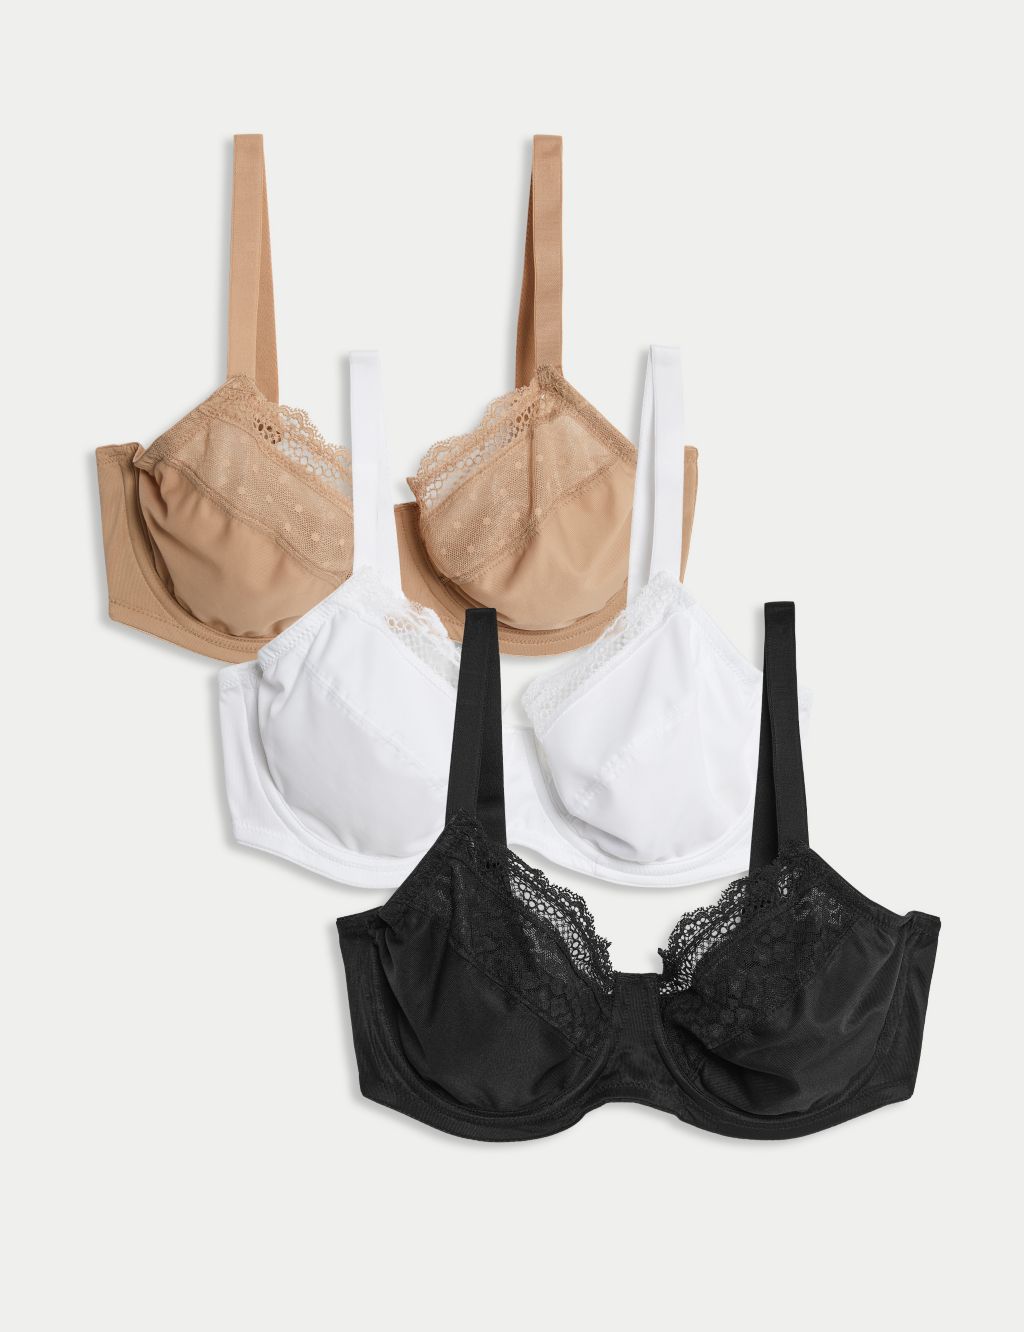 Belk: Refresh your top drawer with 7 for $35 panties & bras from $13